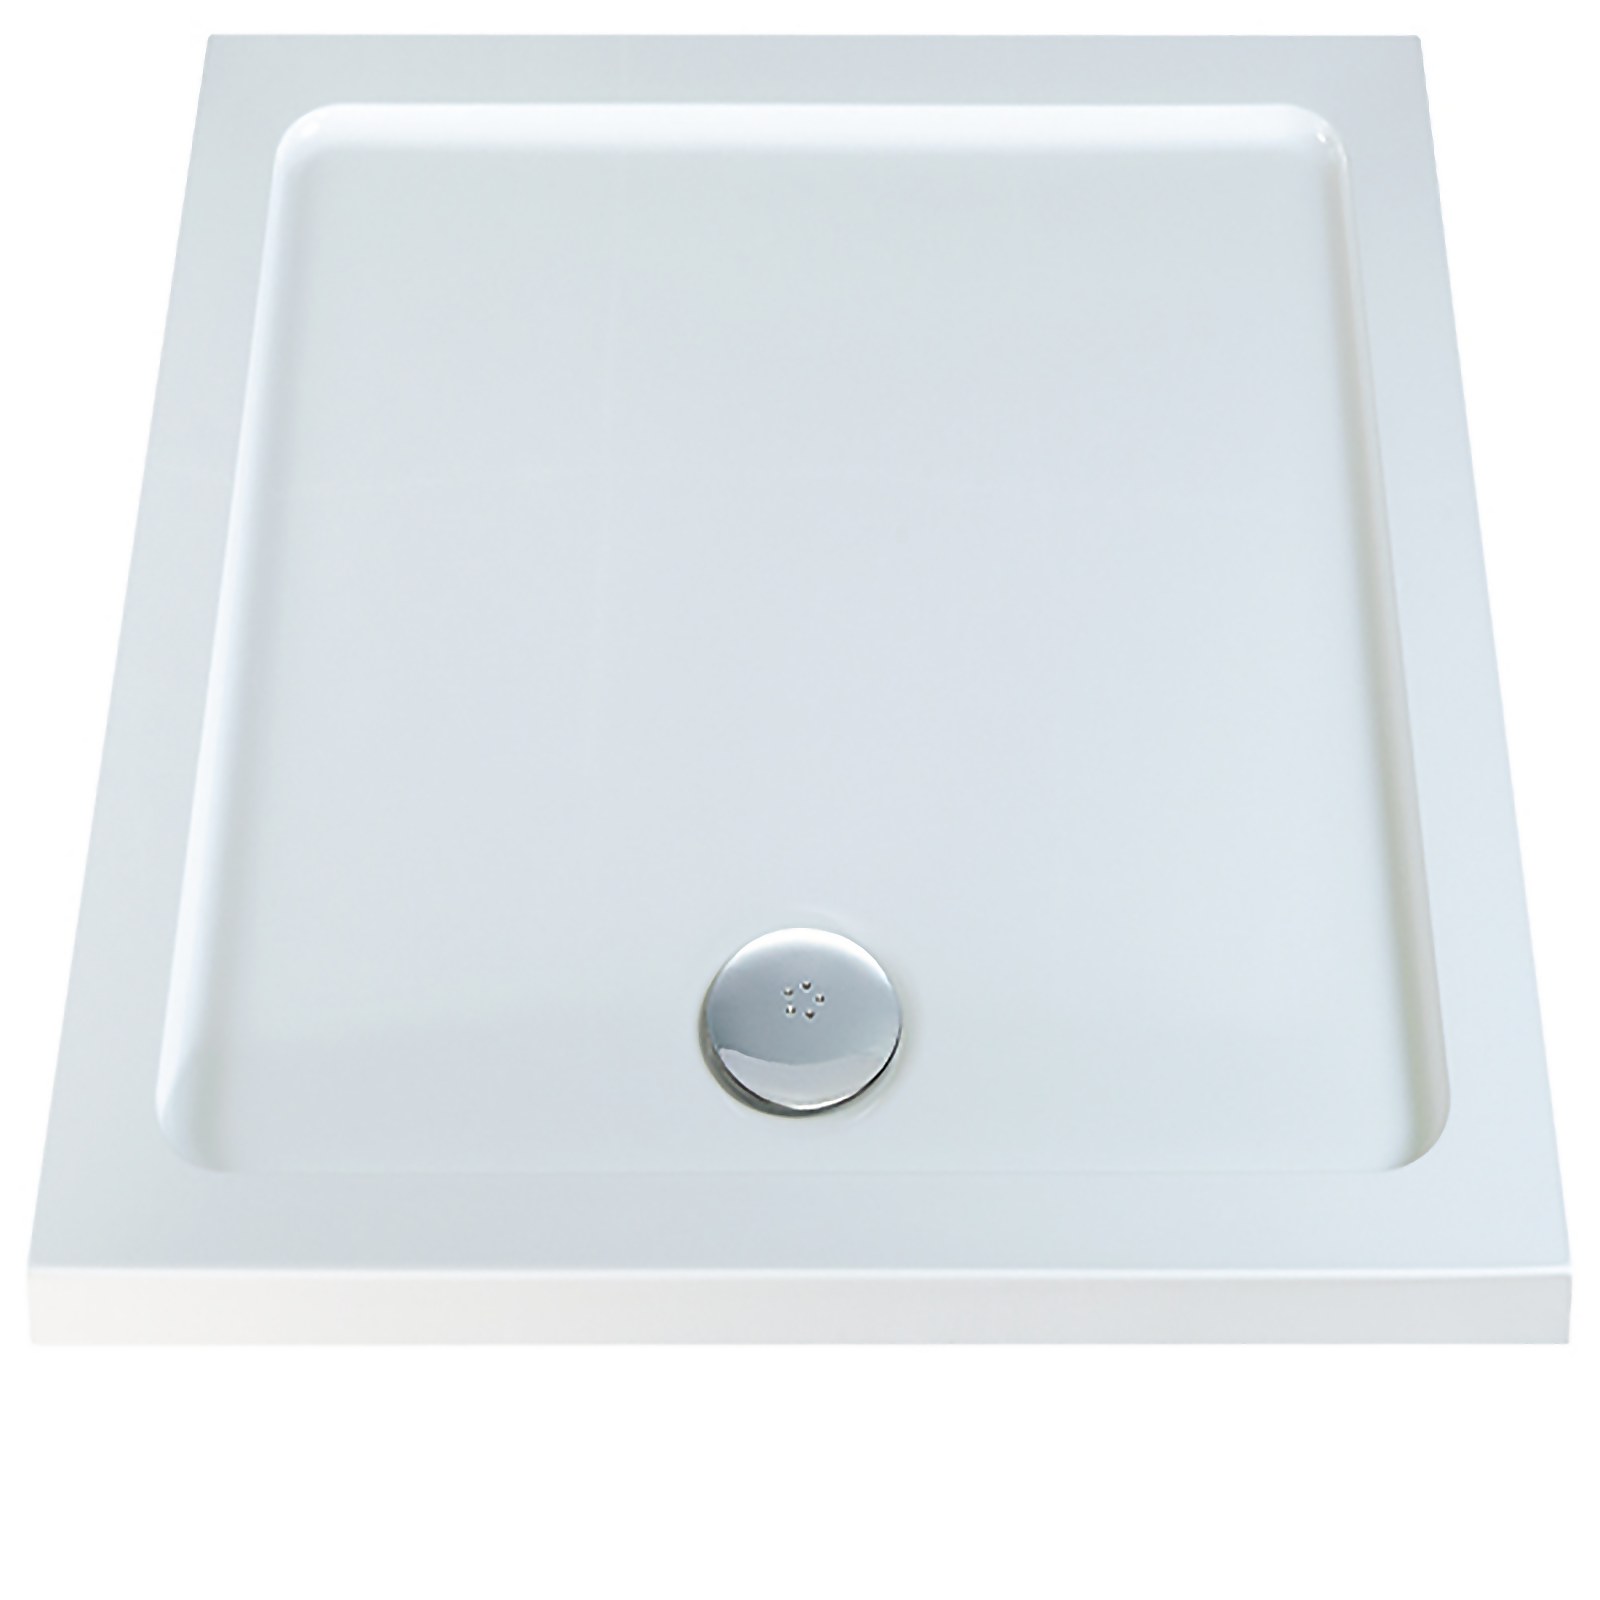 Photo of Bathstore Emerge Square Shower Tray 800 X 800mm